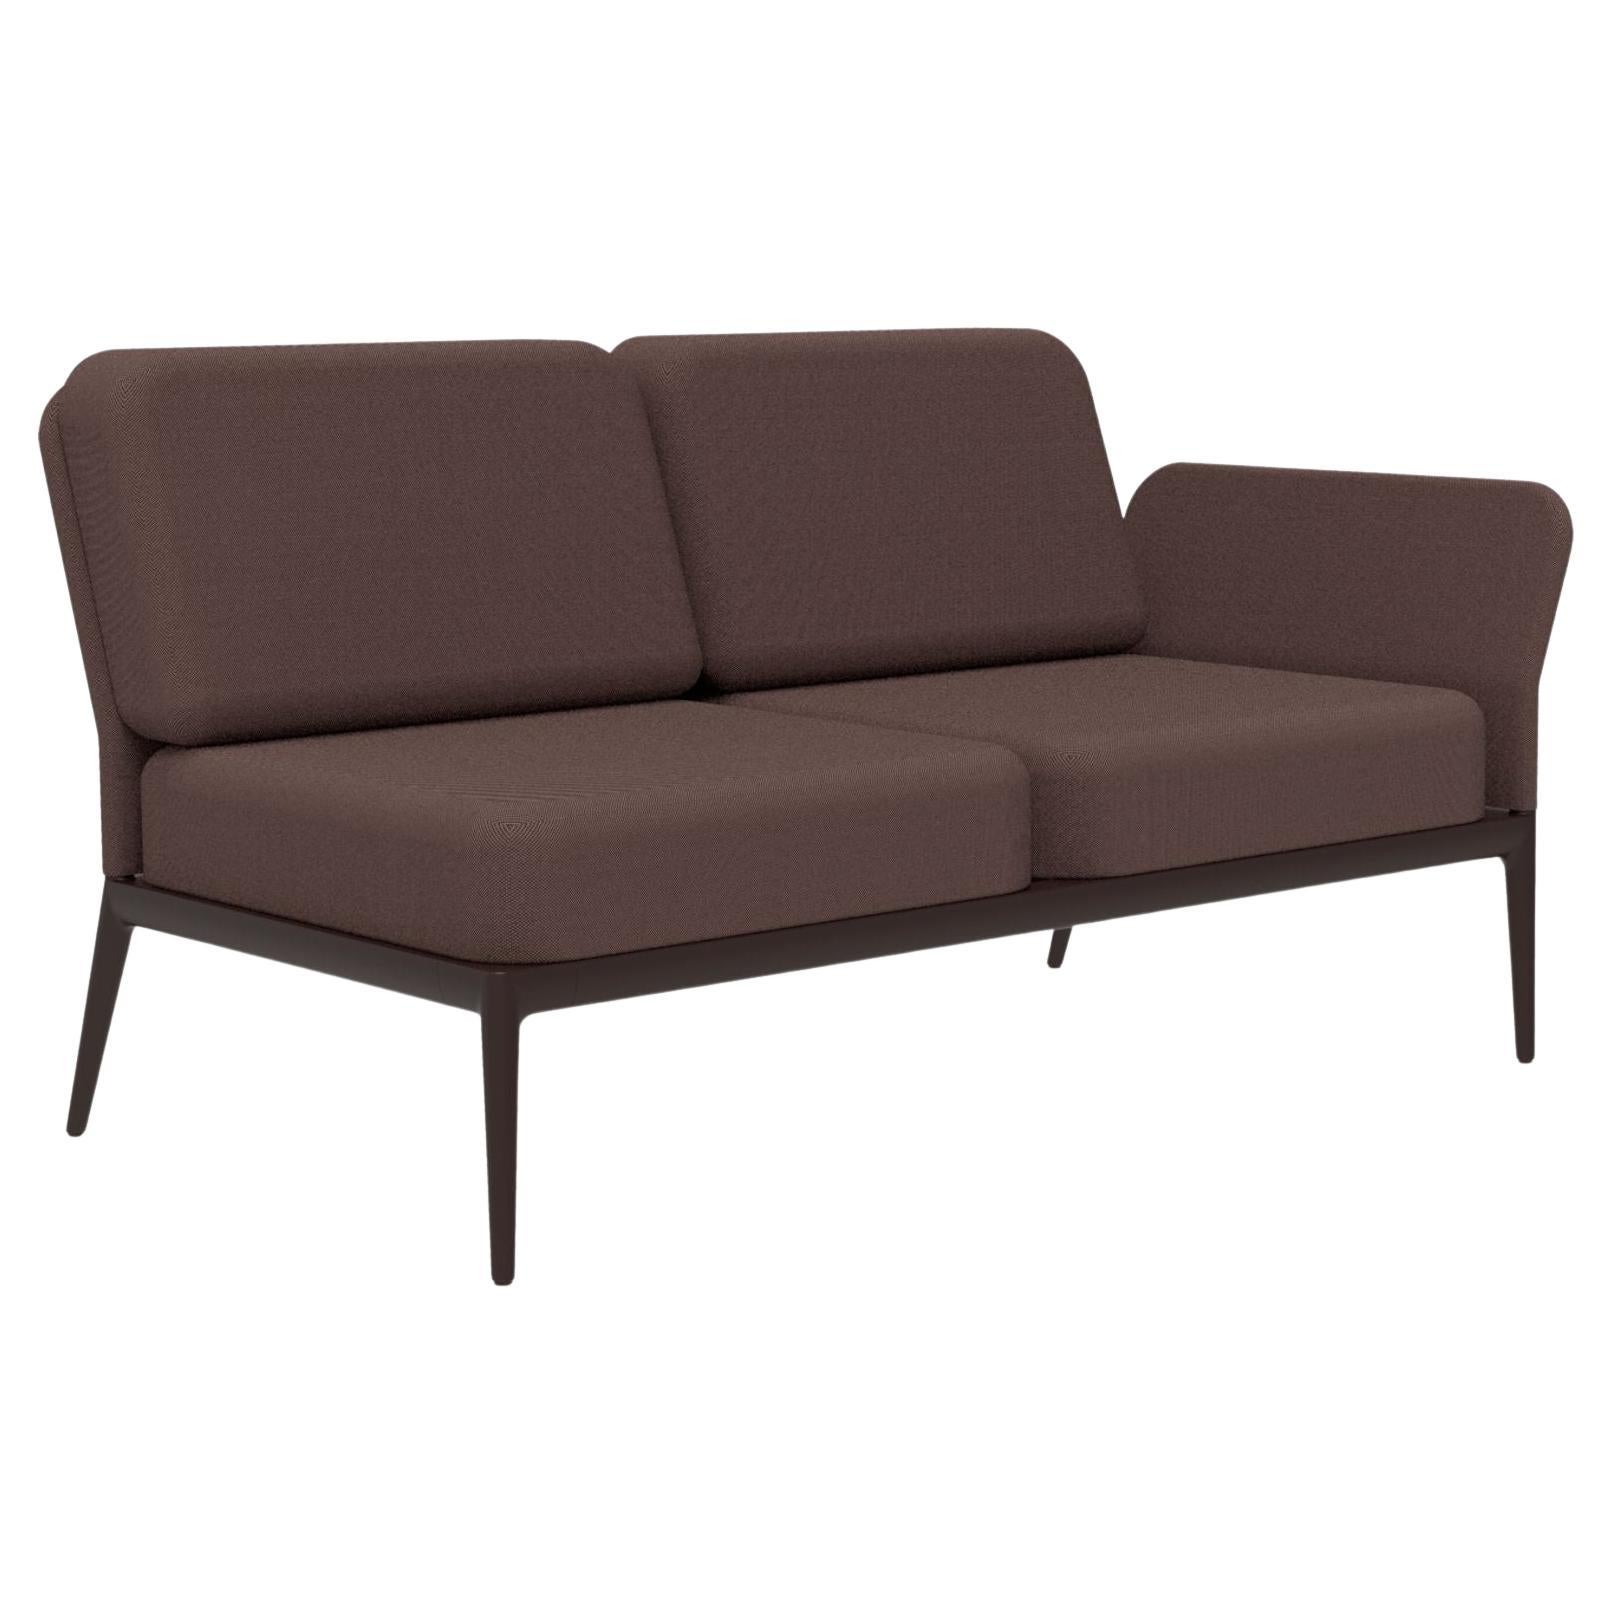 Cover Chocolate Double Left Modular Sofa by Mowee For Sale